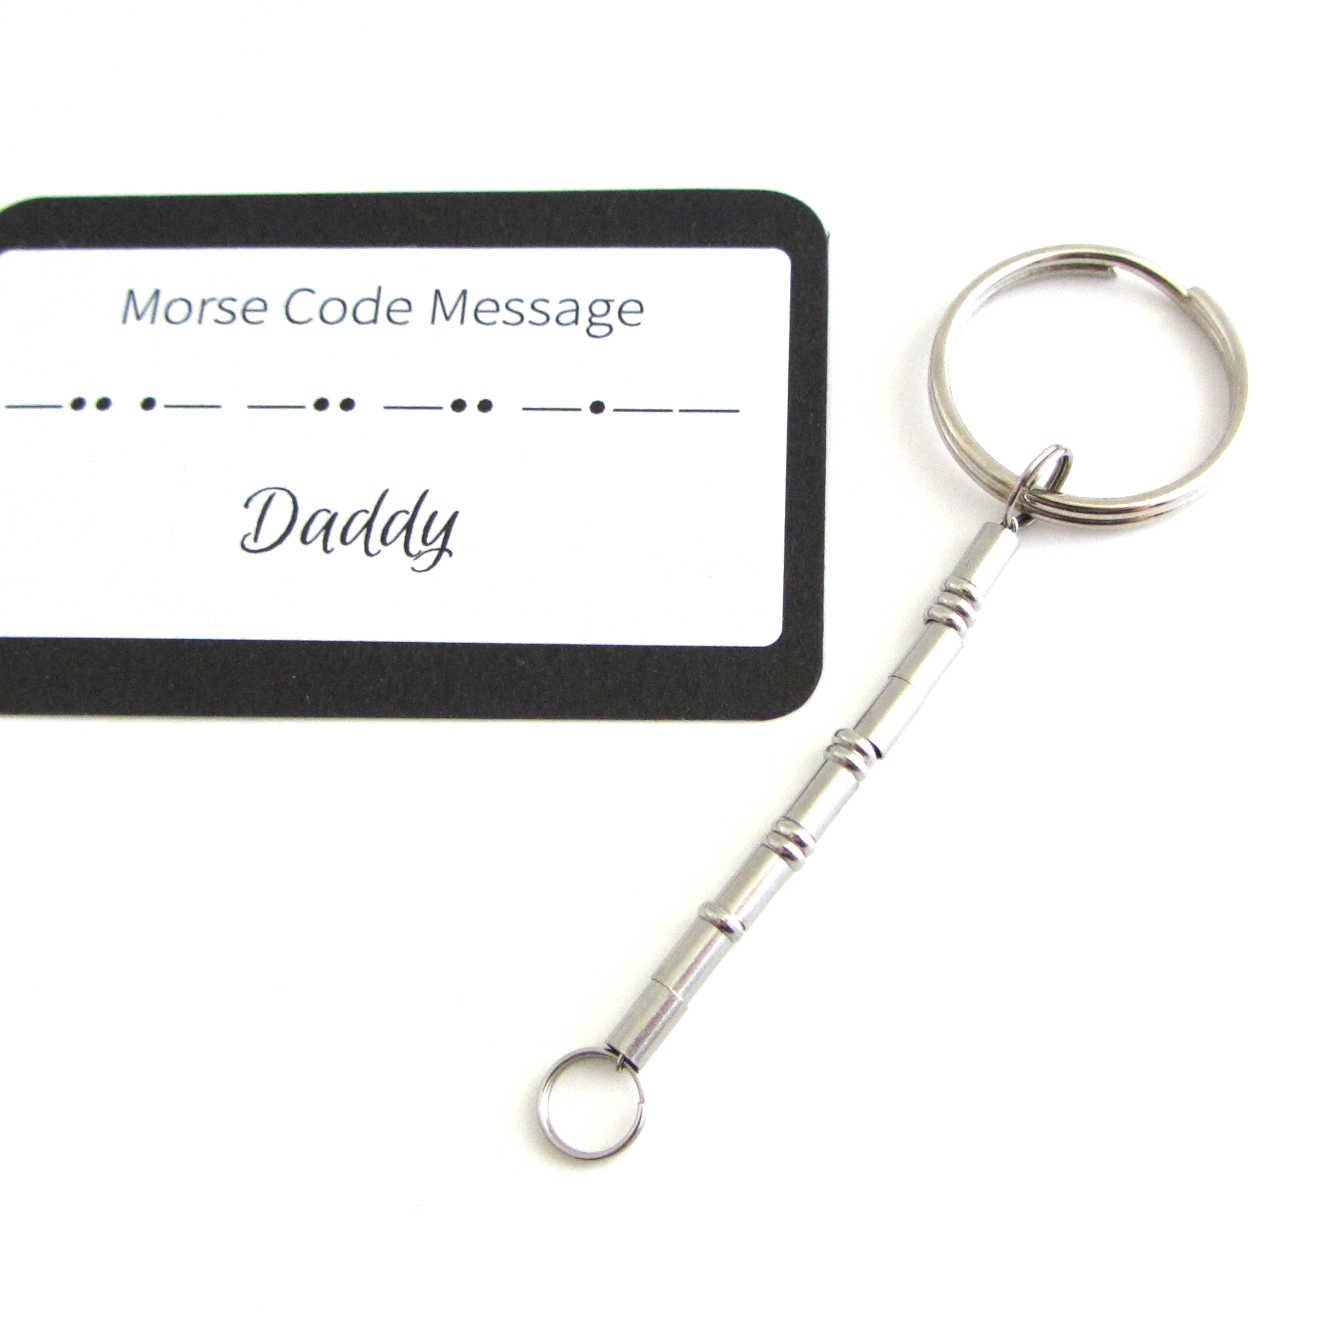 'daddy' keyring written in morse code stainless steel beads with 'Daddy' morse code message card